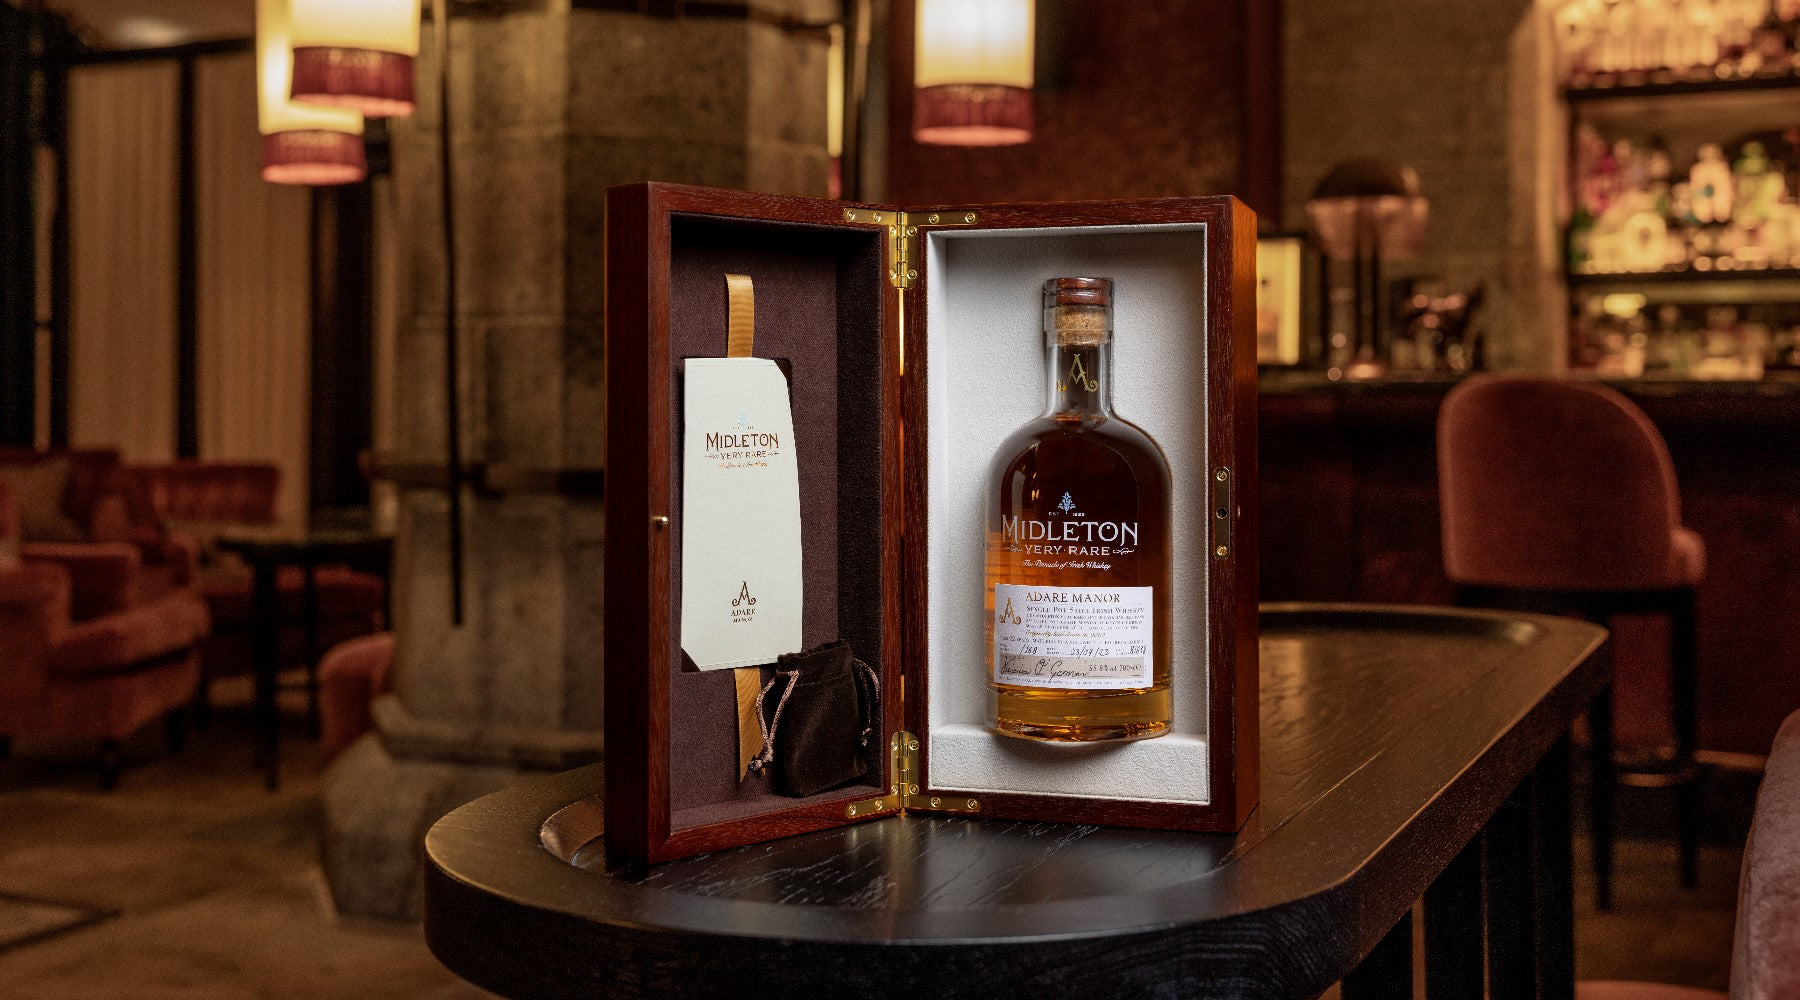 Adare Manor Midleton Very Rare Single Cask — the fifth exceptional release in its long-term partnership with Midleton Distillery — is now available